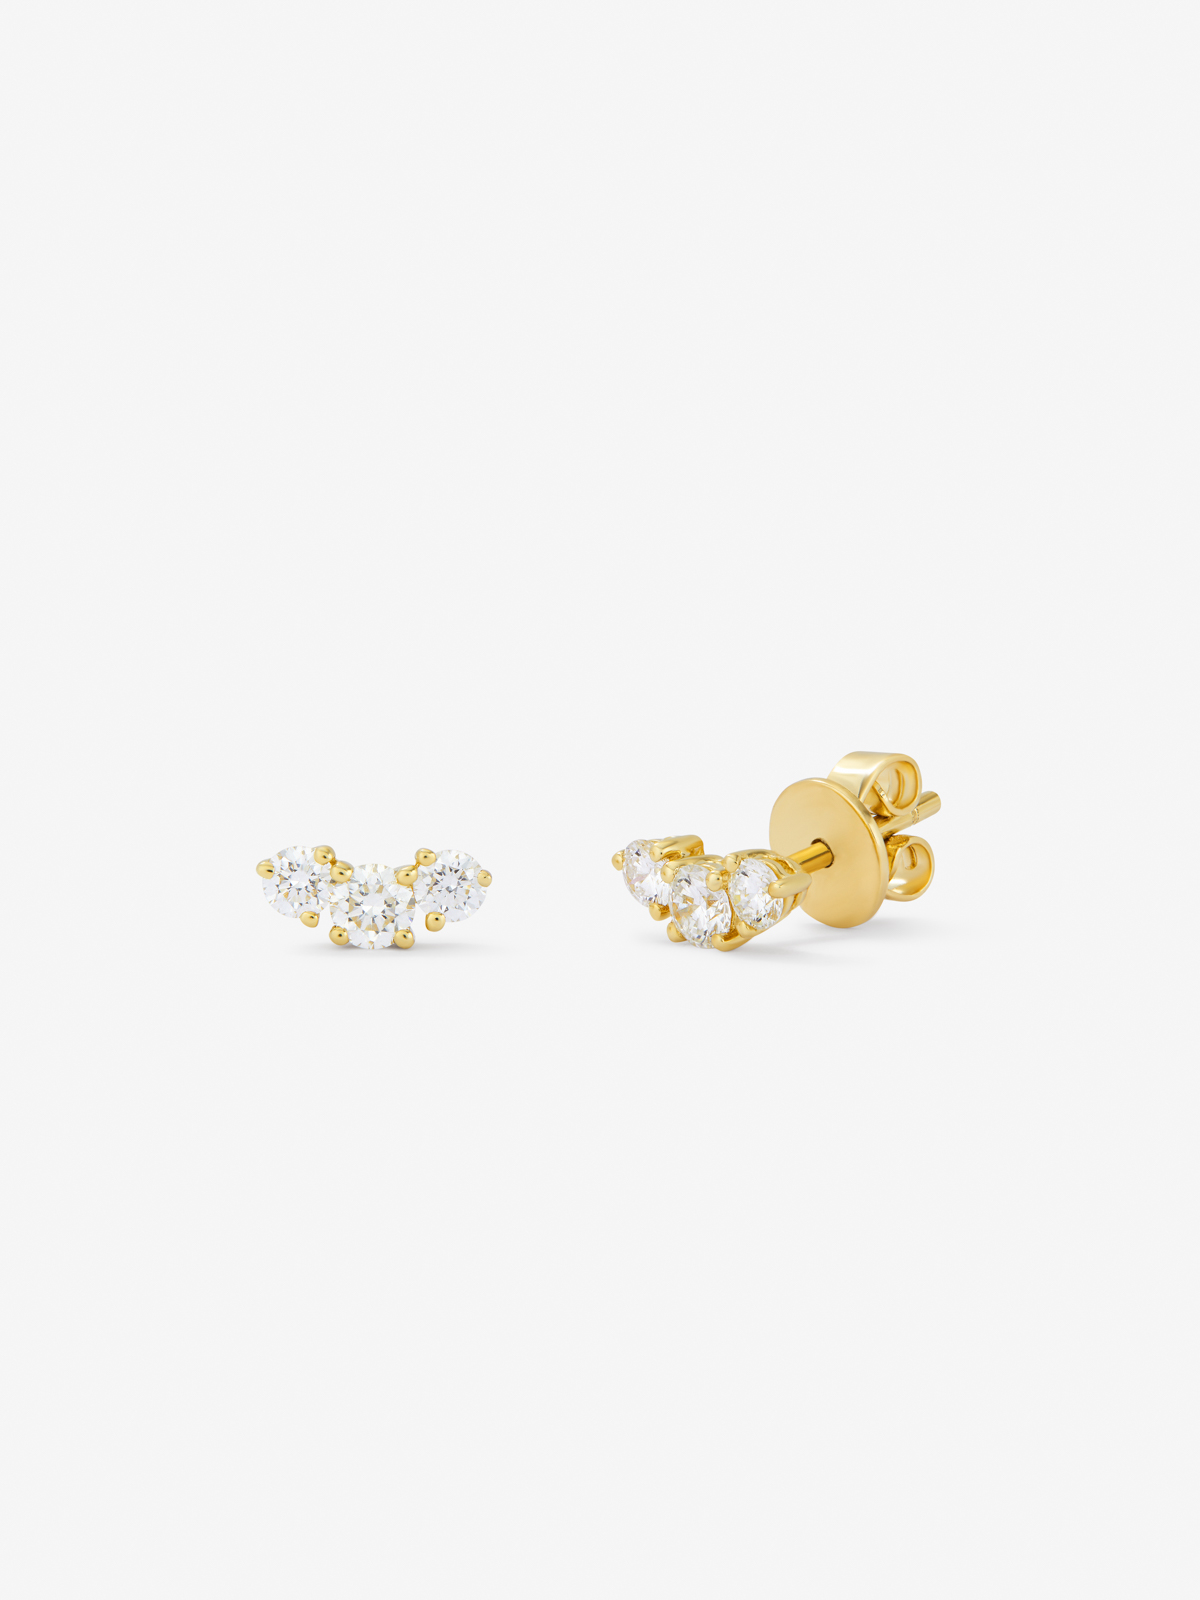 18K yellow gold earrings with white diamonds of 0.58 cts